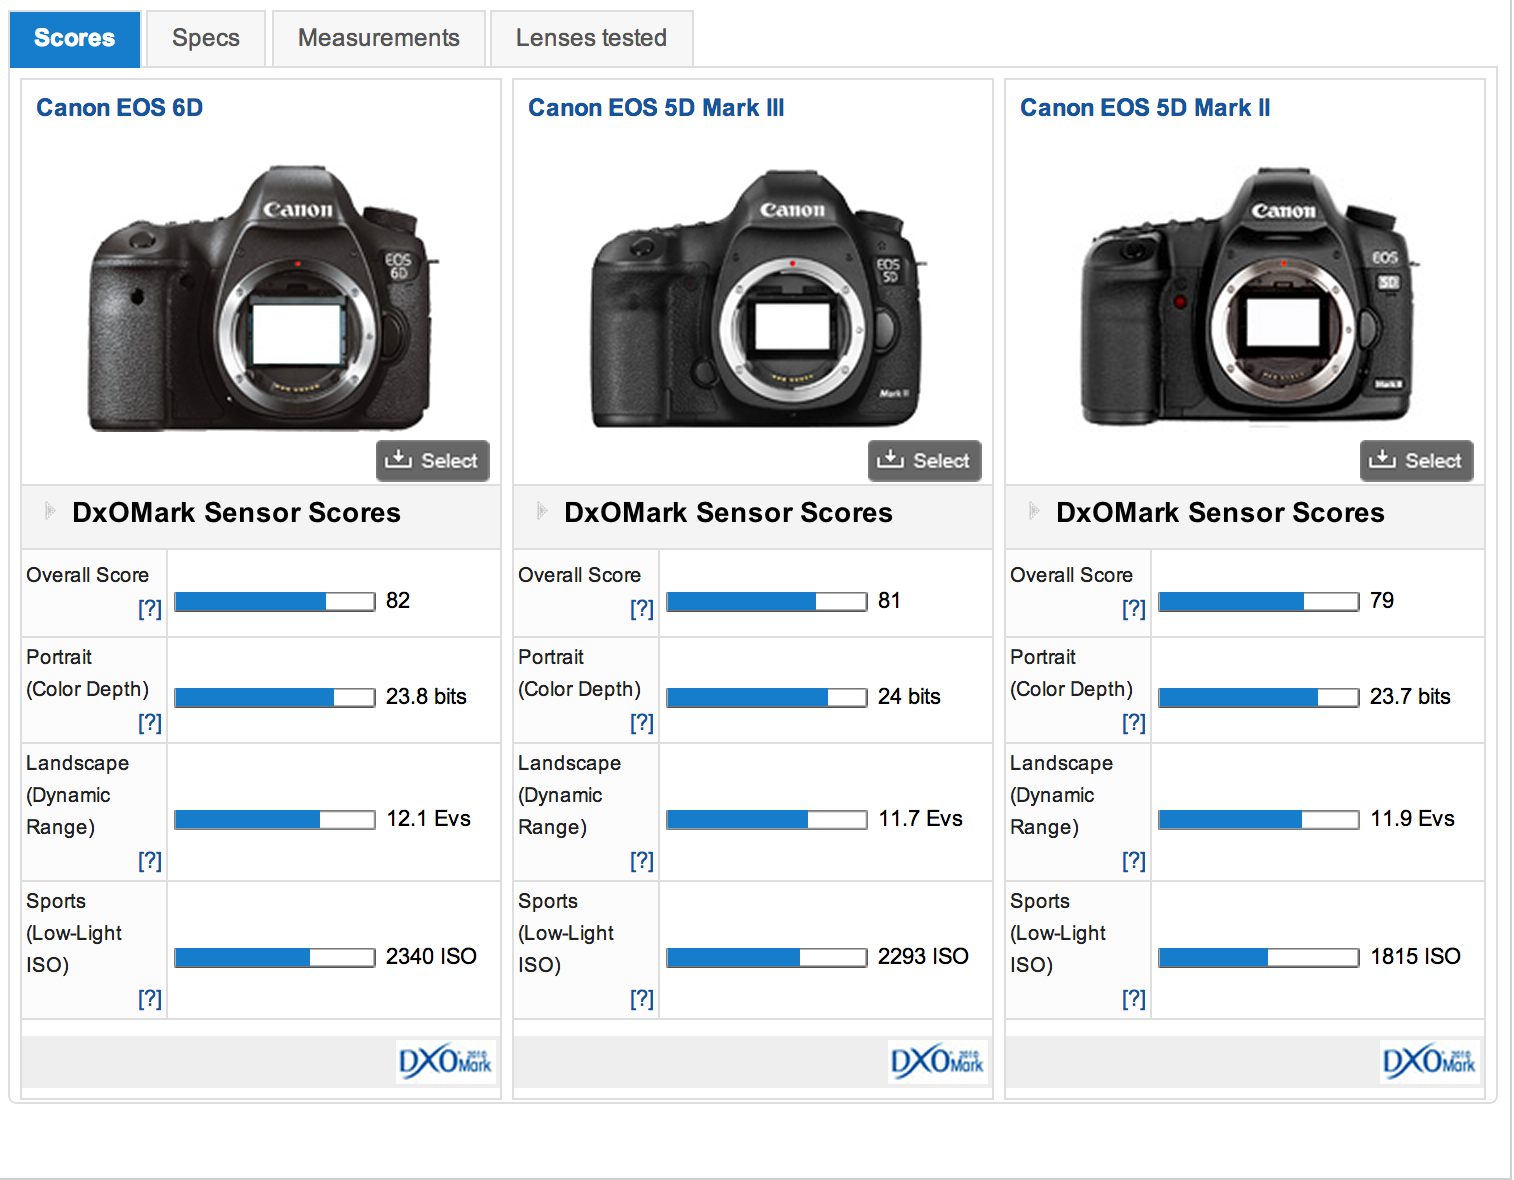 DXO Rates the Canon 6D’s Sensor as Better Than the 5D Mk III’s and 5D Mk II’s